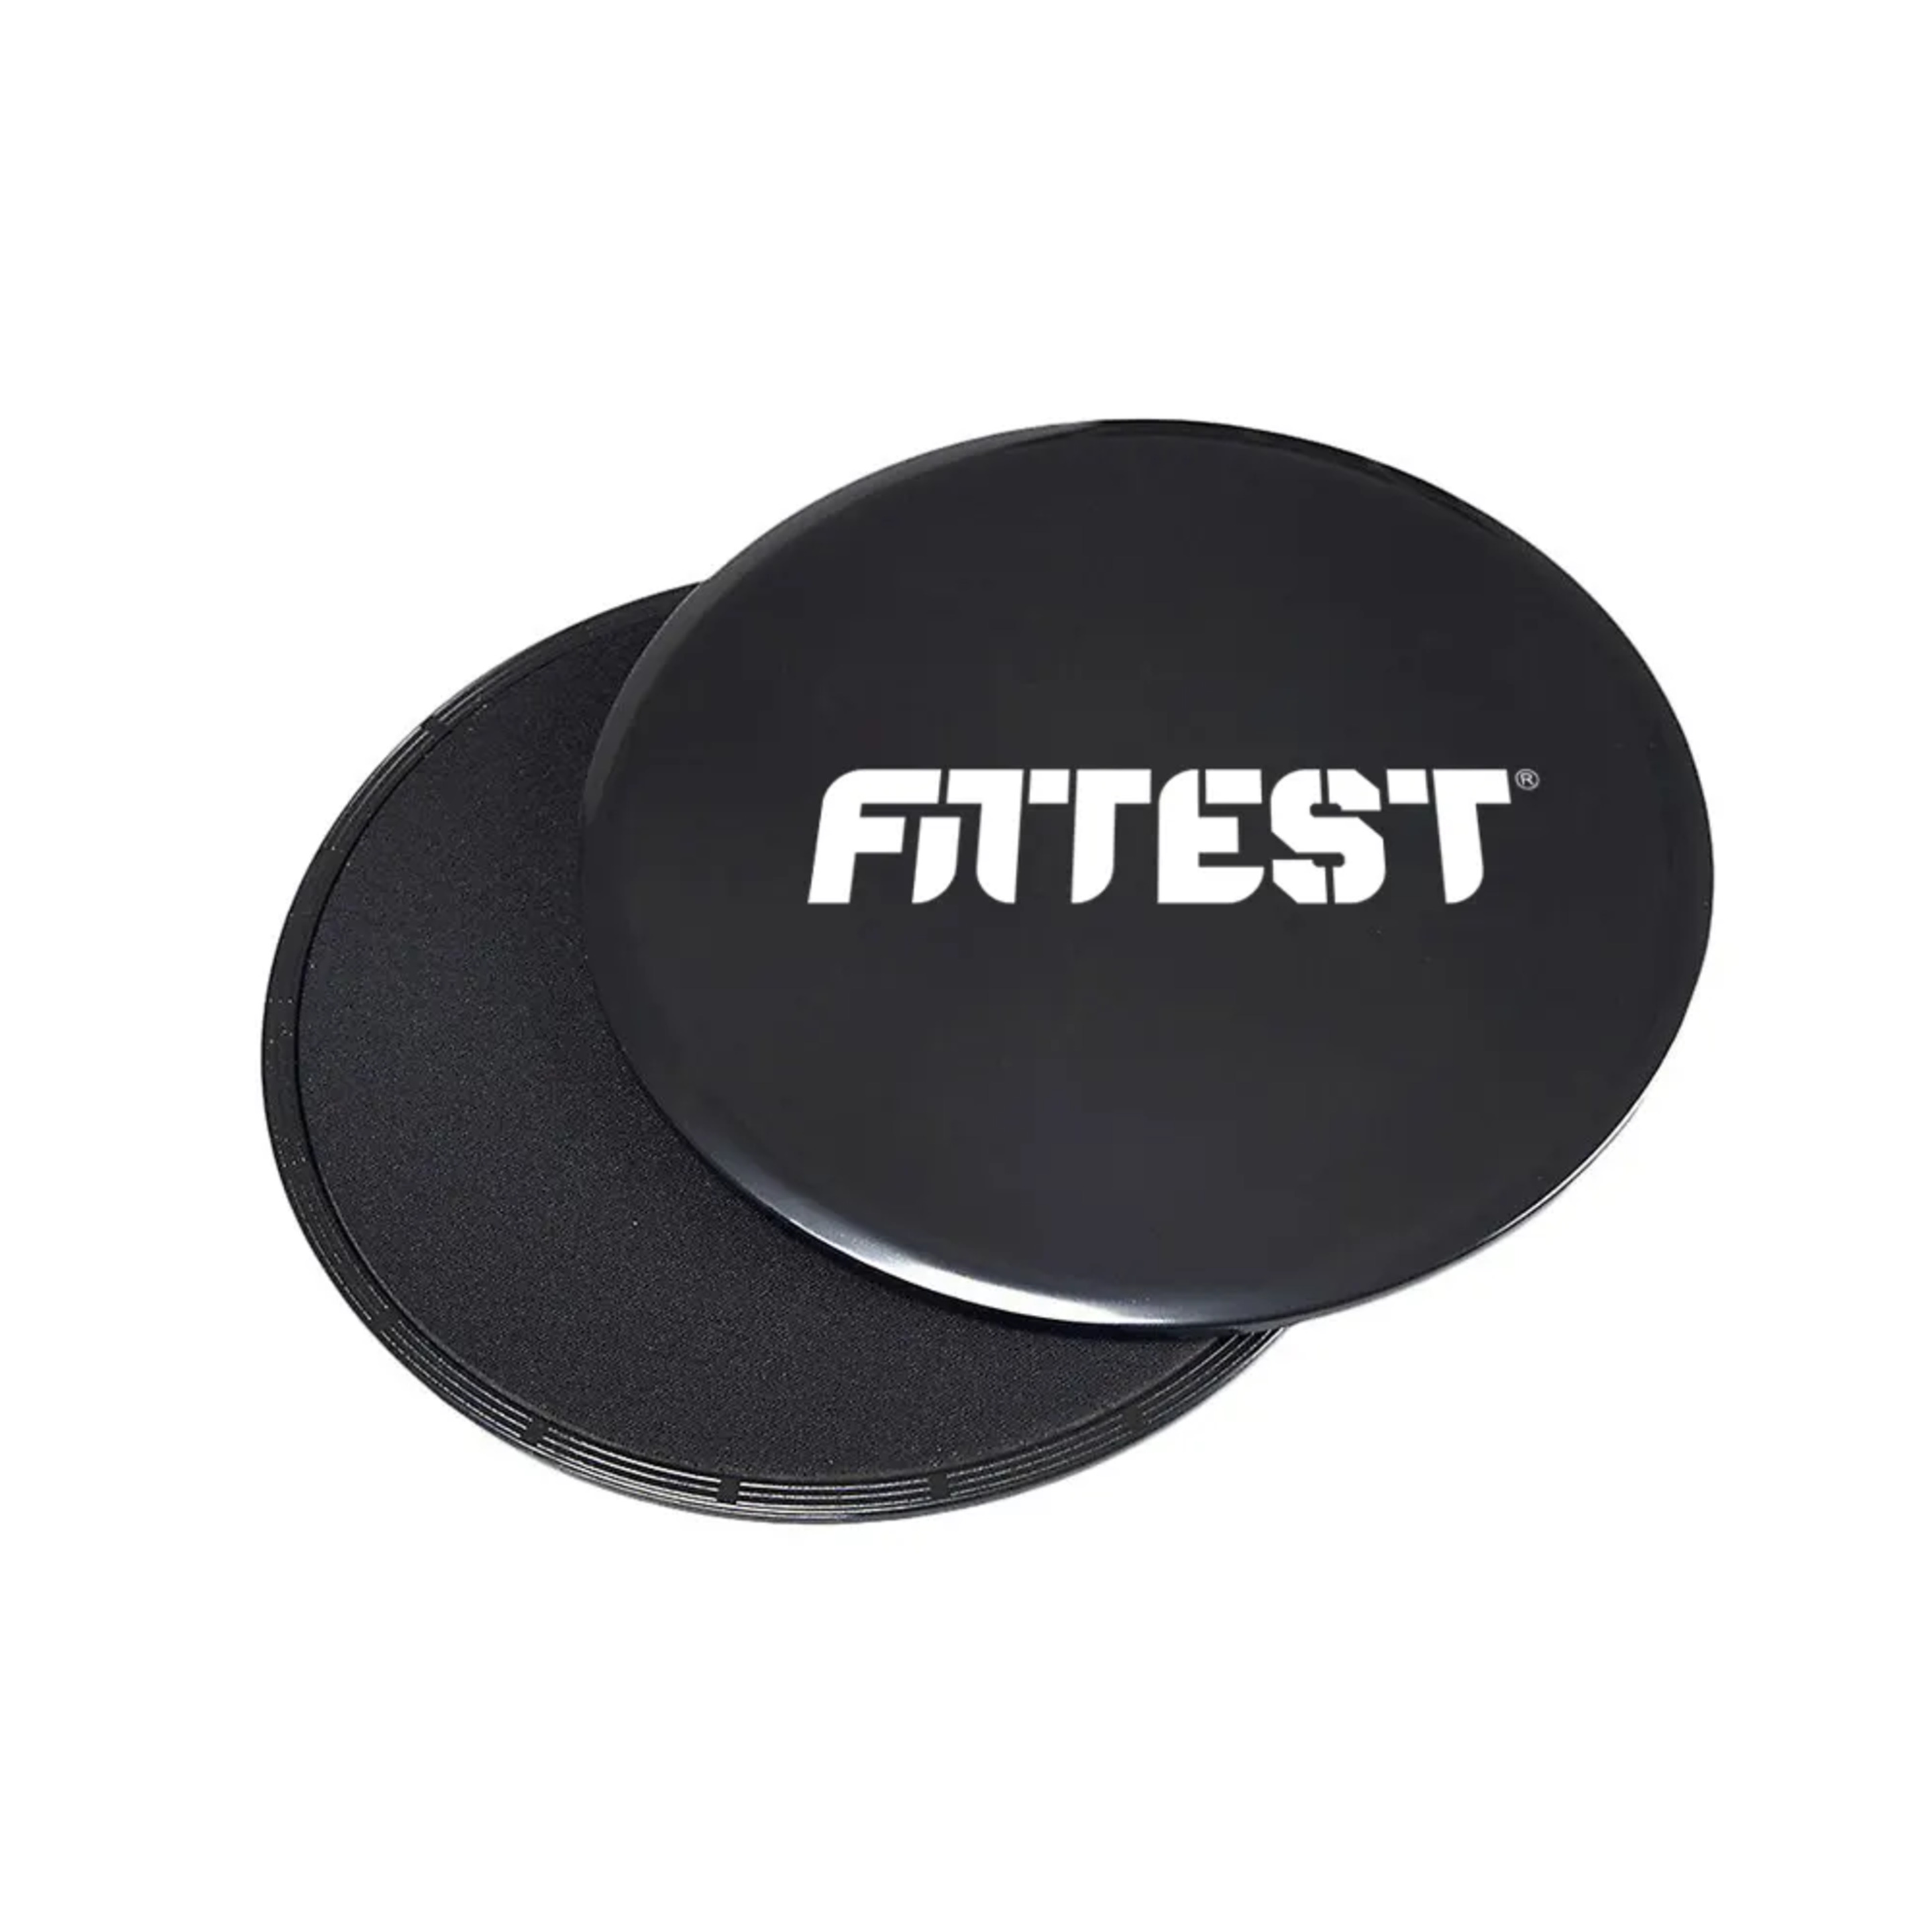 Discos - Fittest - Core Sliders